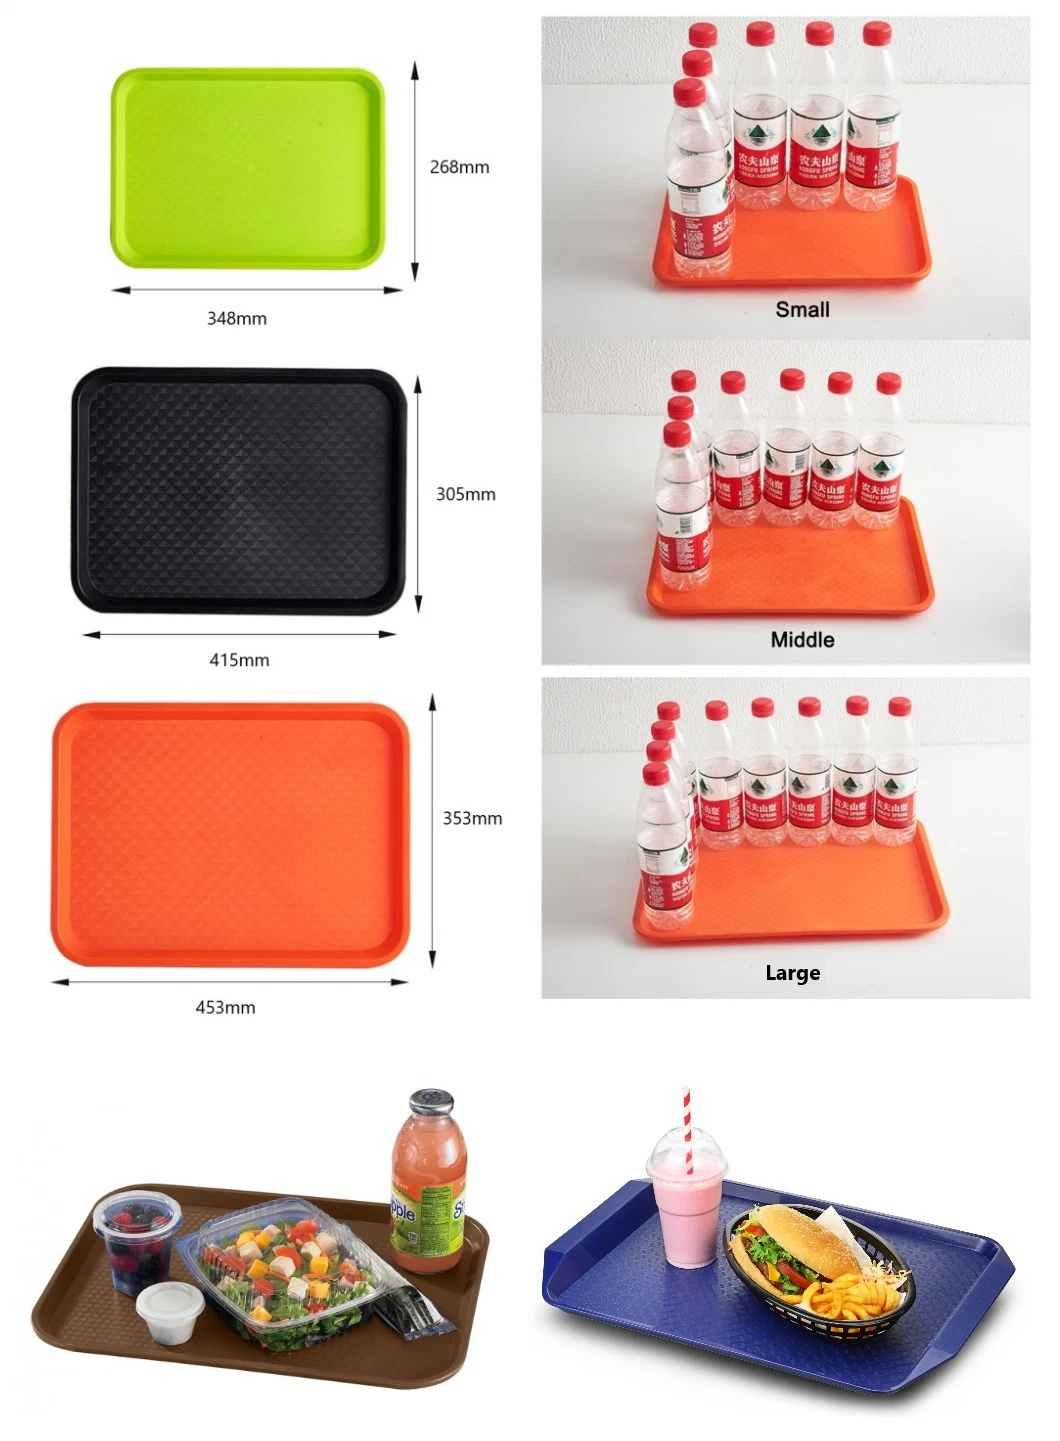 Catering Service Non Slip Plastic Fast Food Serving Tray for Cafe Restaurant Canteen Bar